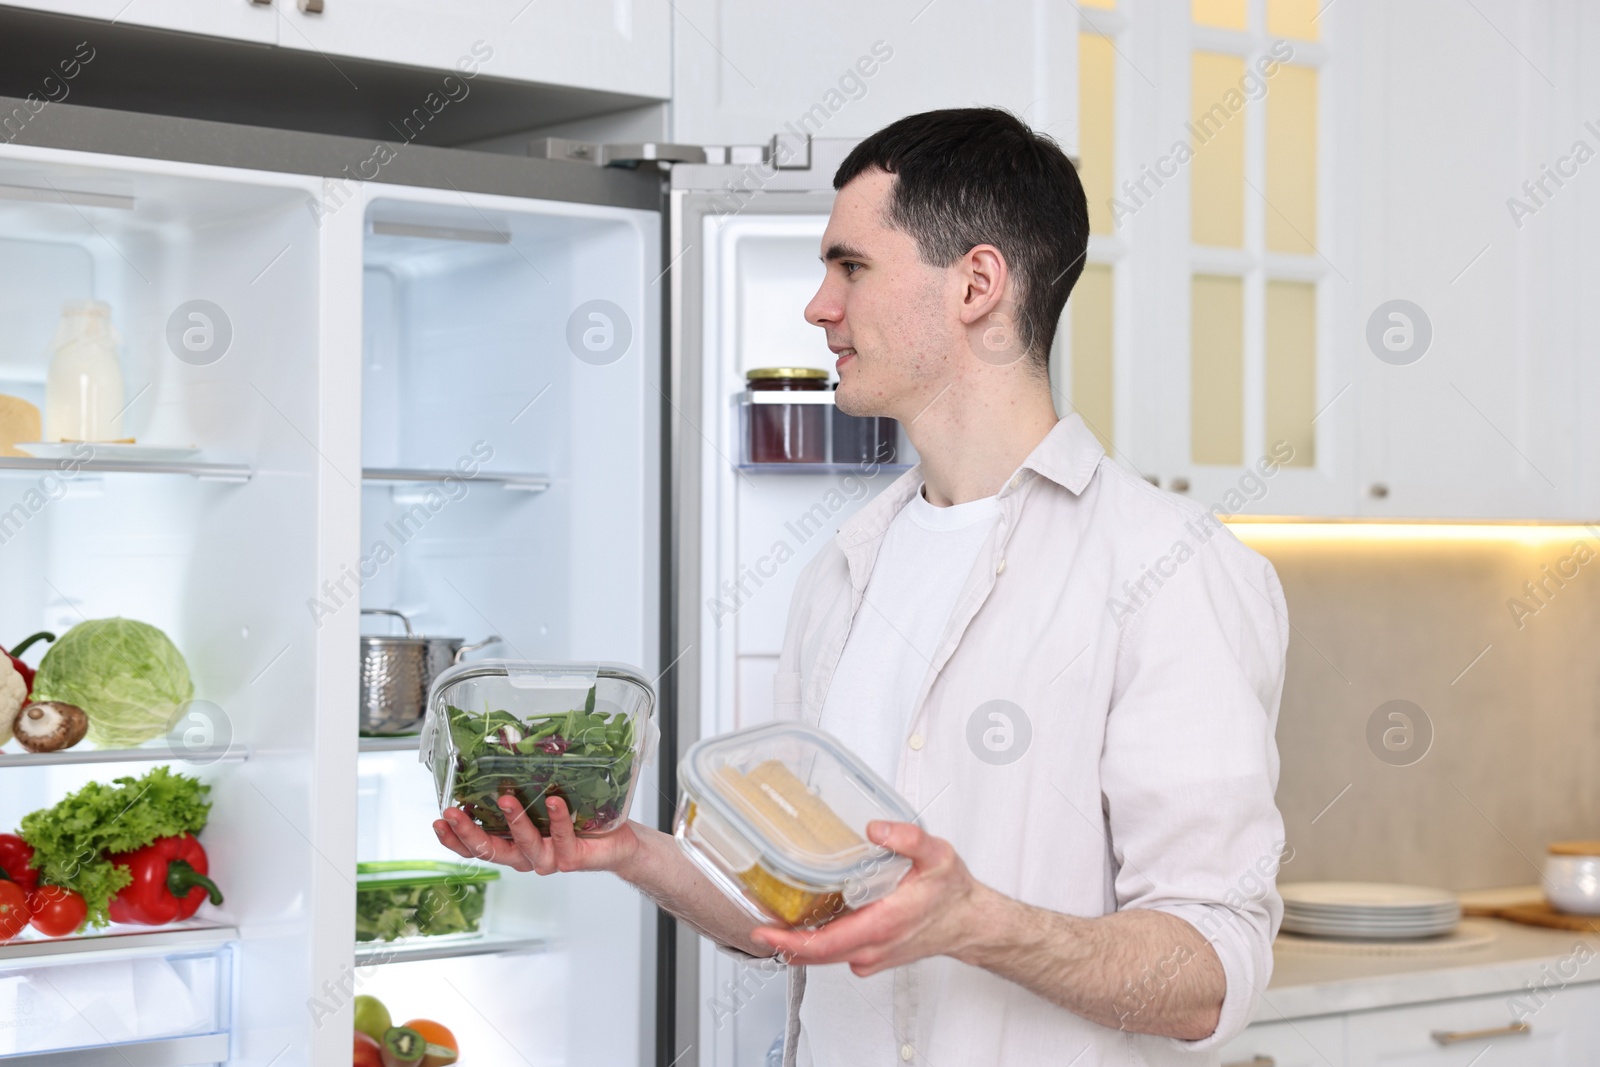 Photo of Man holding ketchup near refrigerator in kitchen